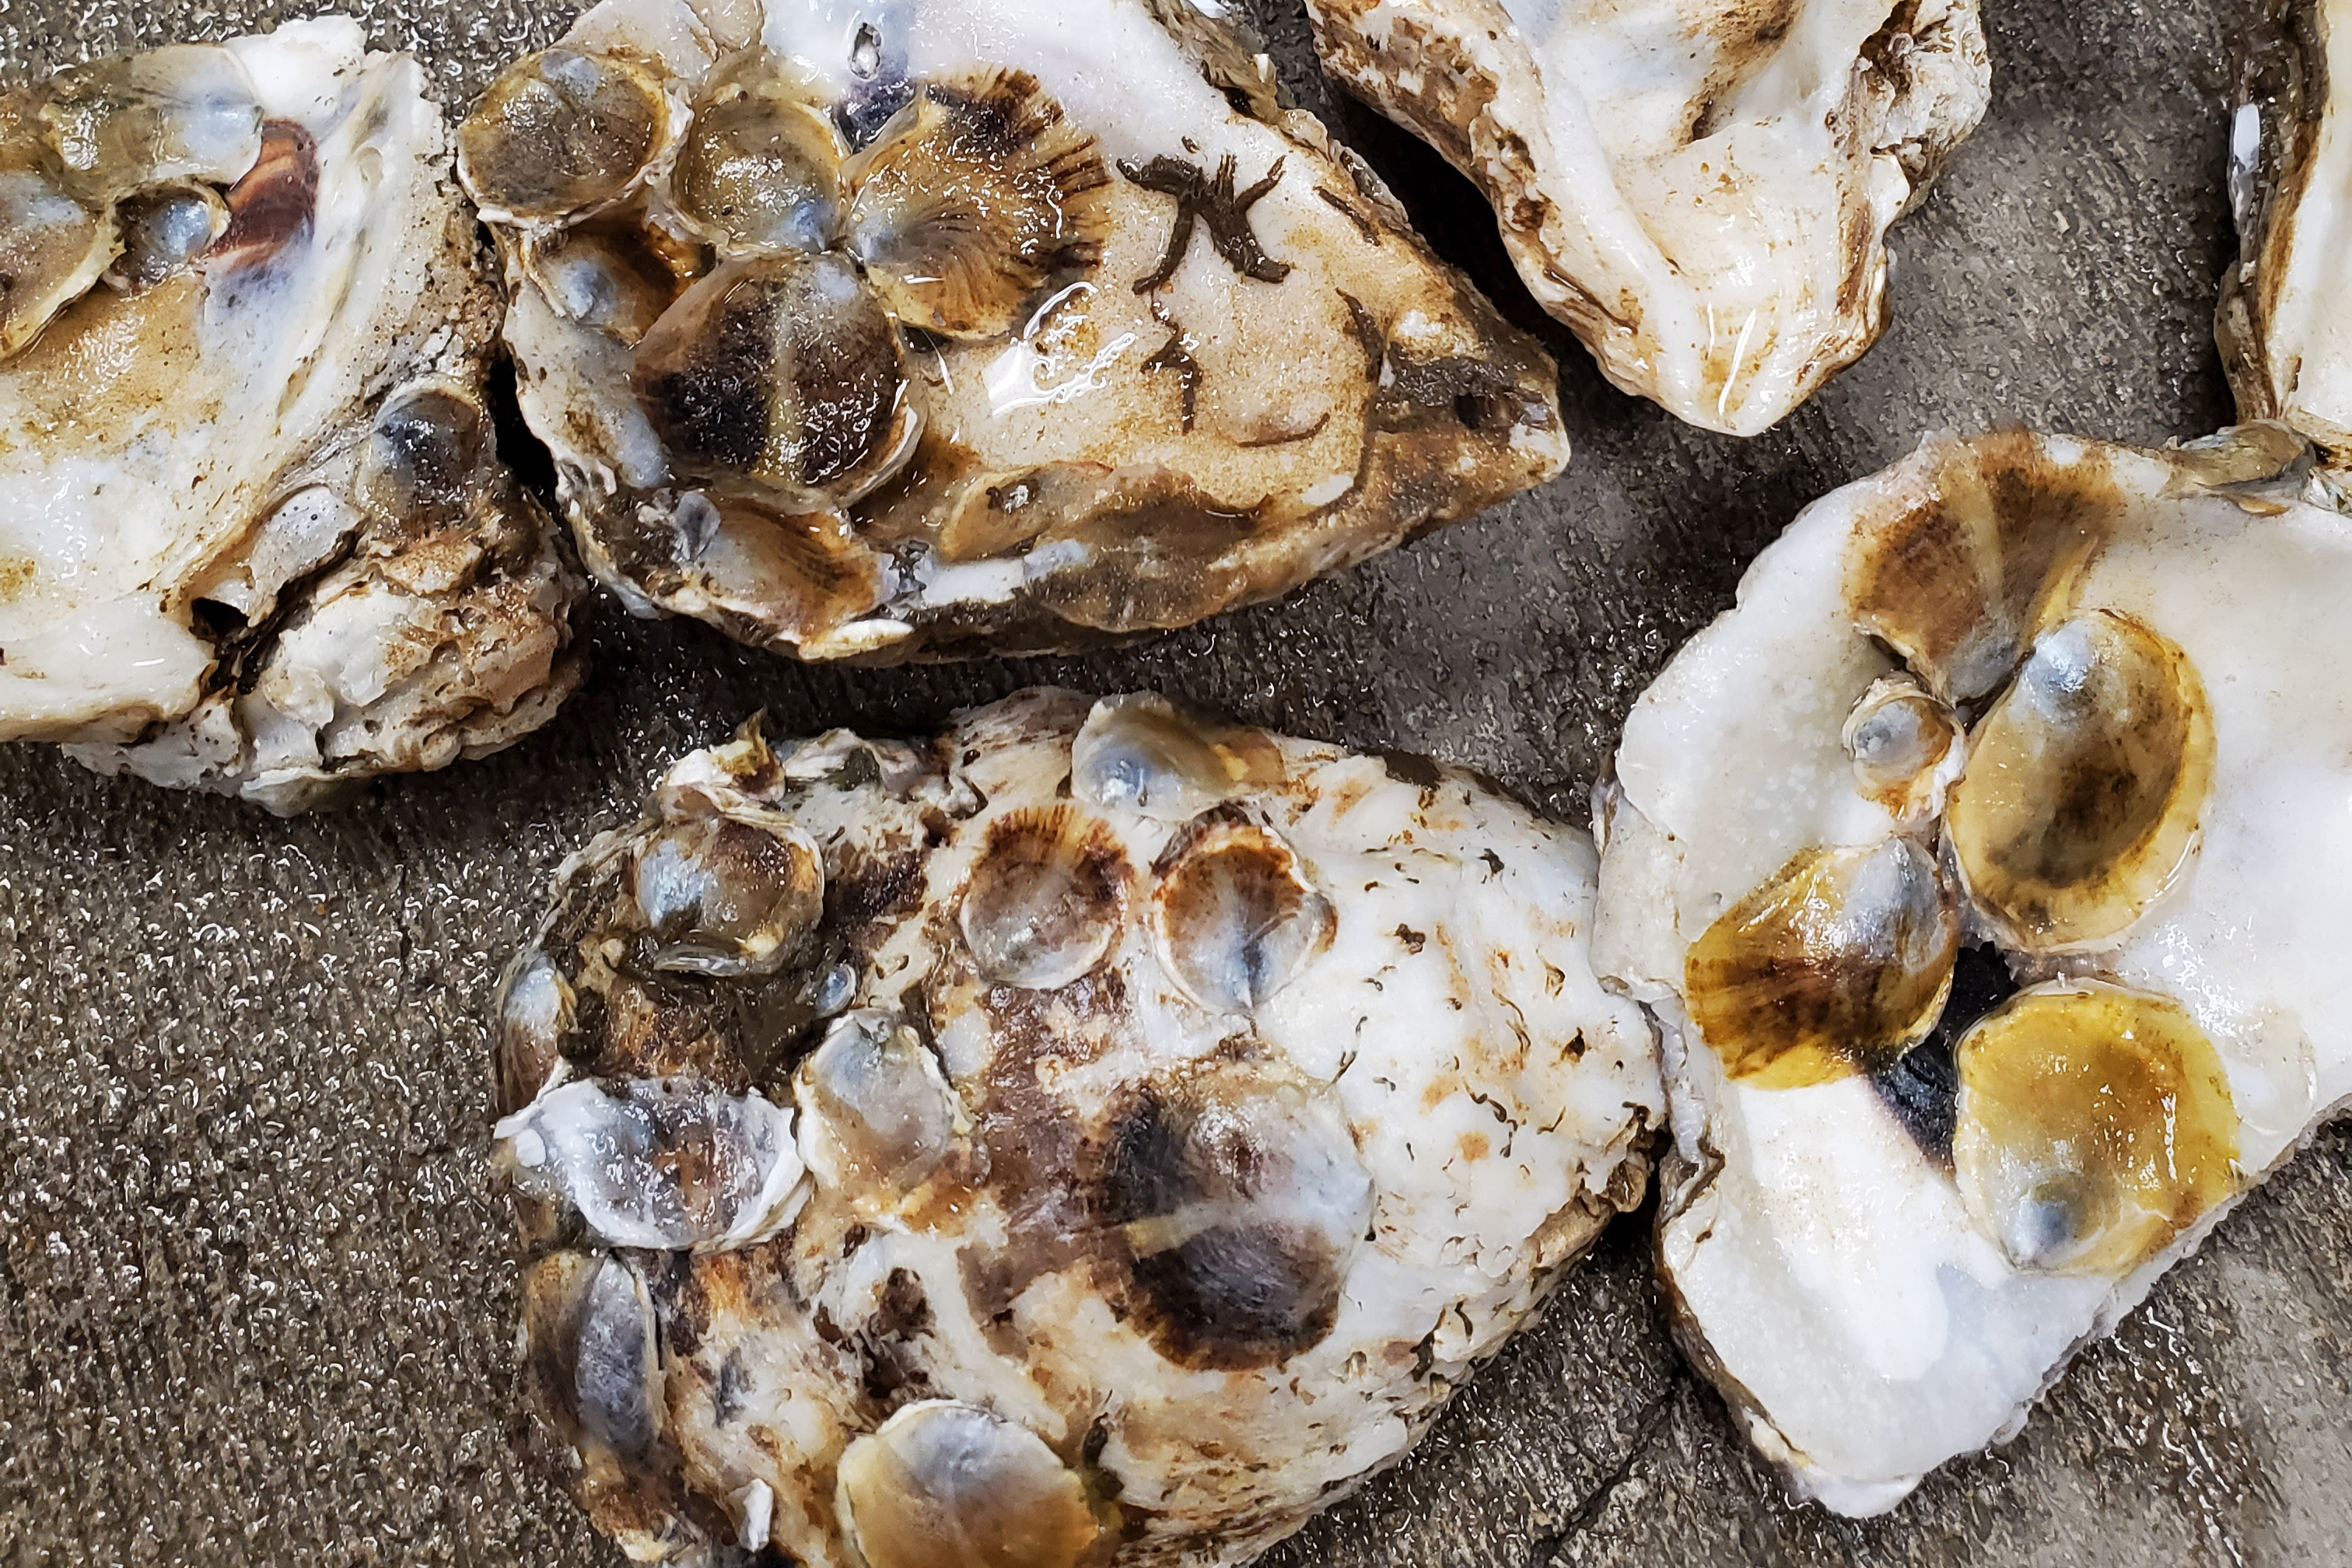 Image: Researchers Investigate Innovative Way to Plant Oysters for Restoration